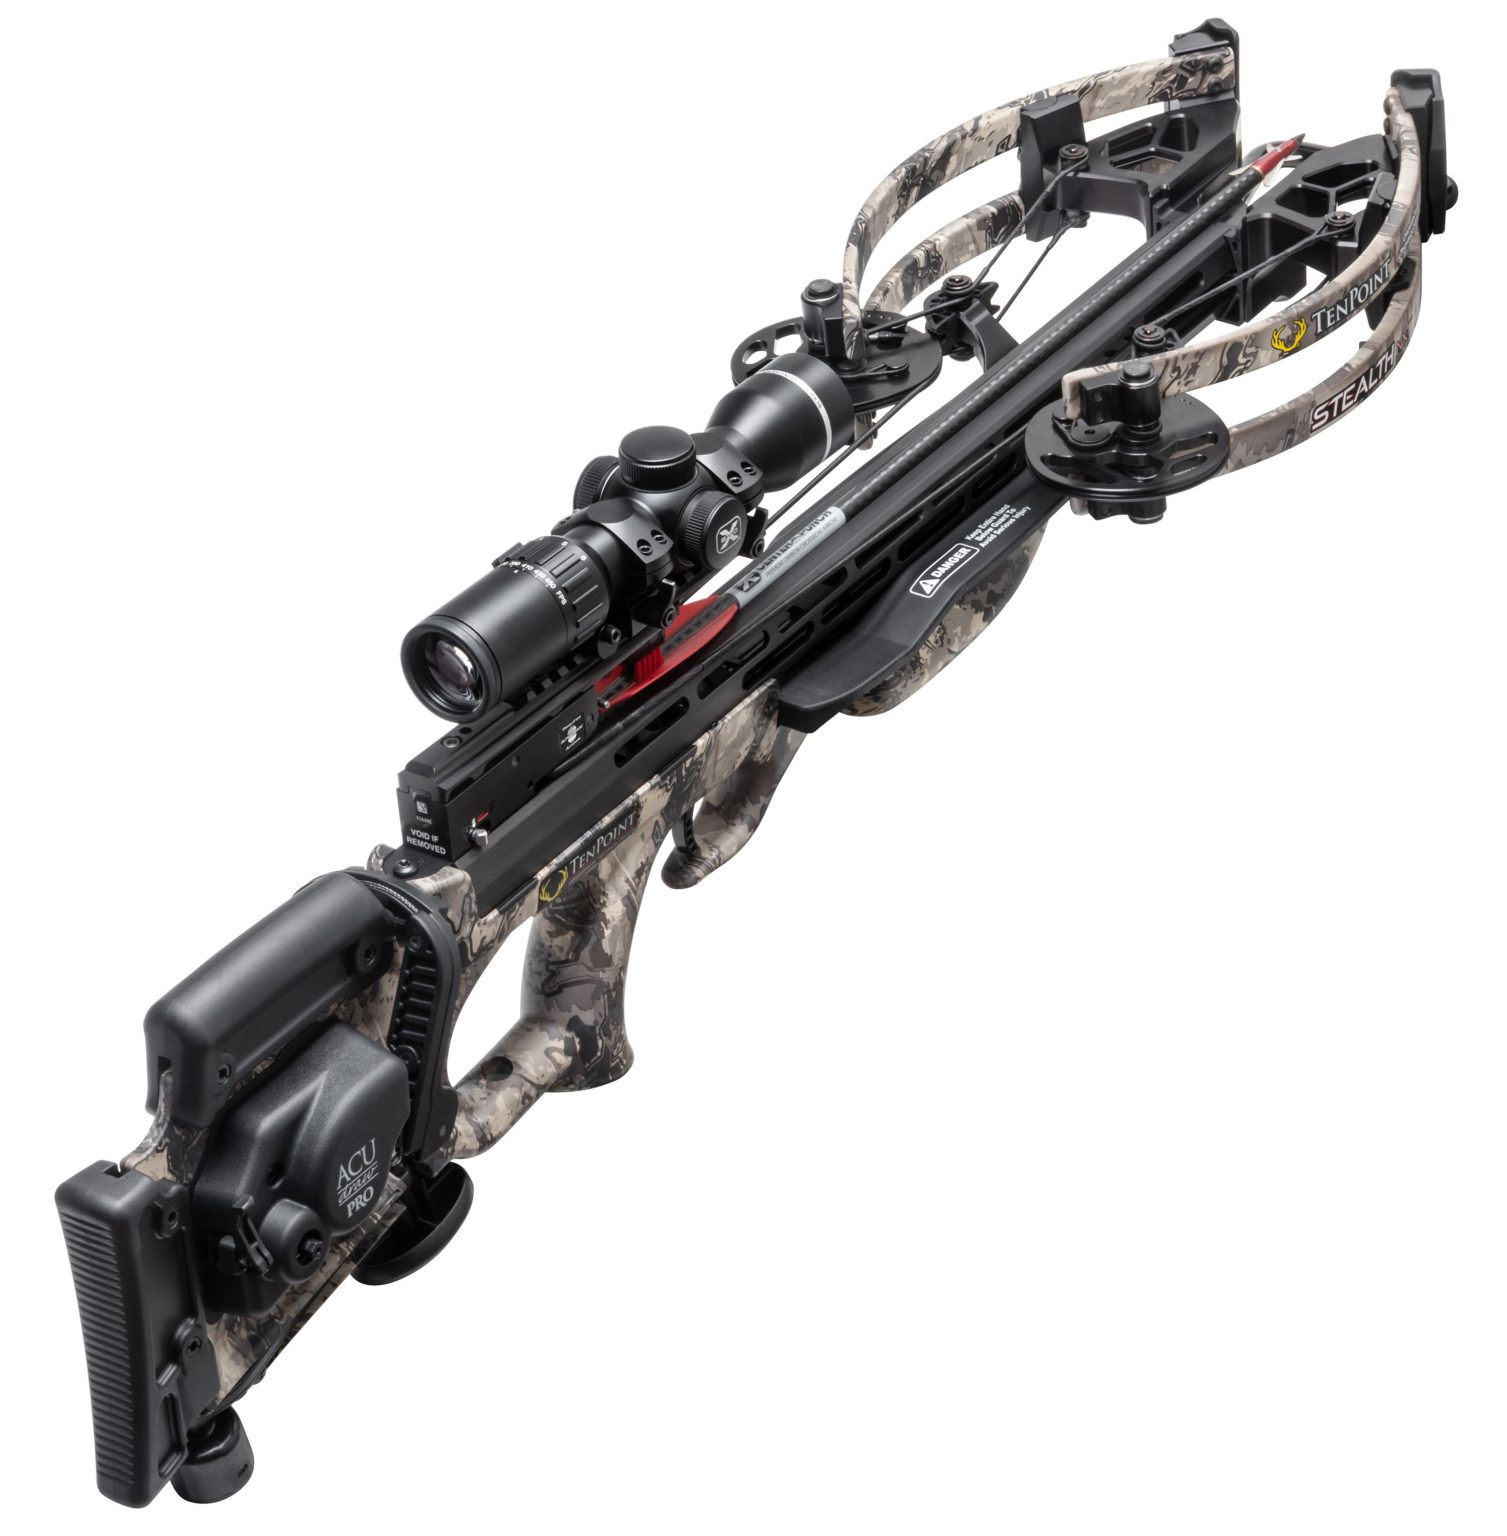 TenPoint to Unveil 3 HighPerformance Crossbows with the Safest Cocking